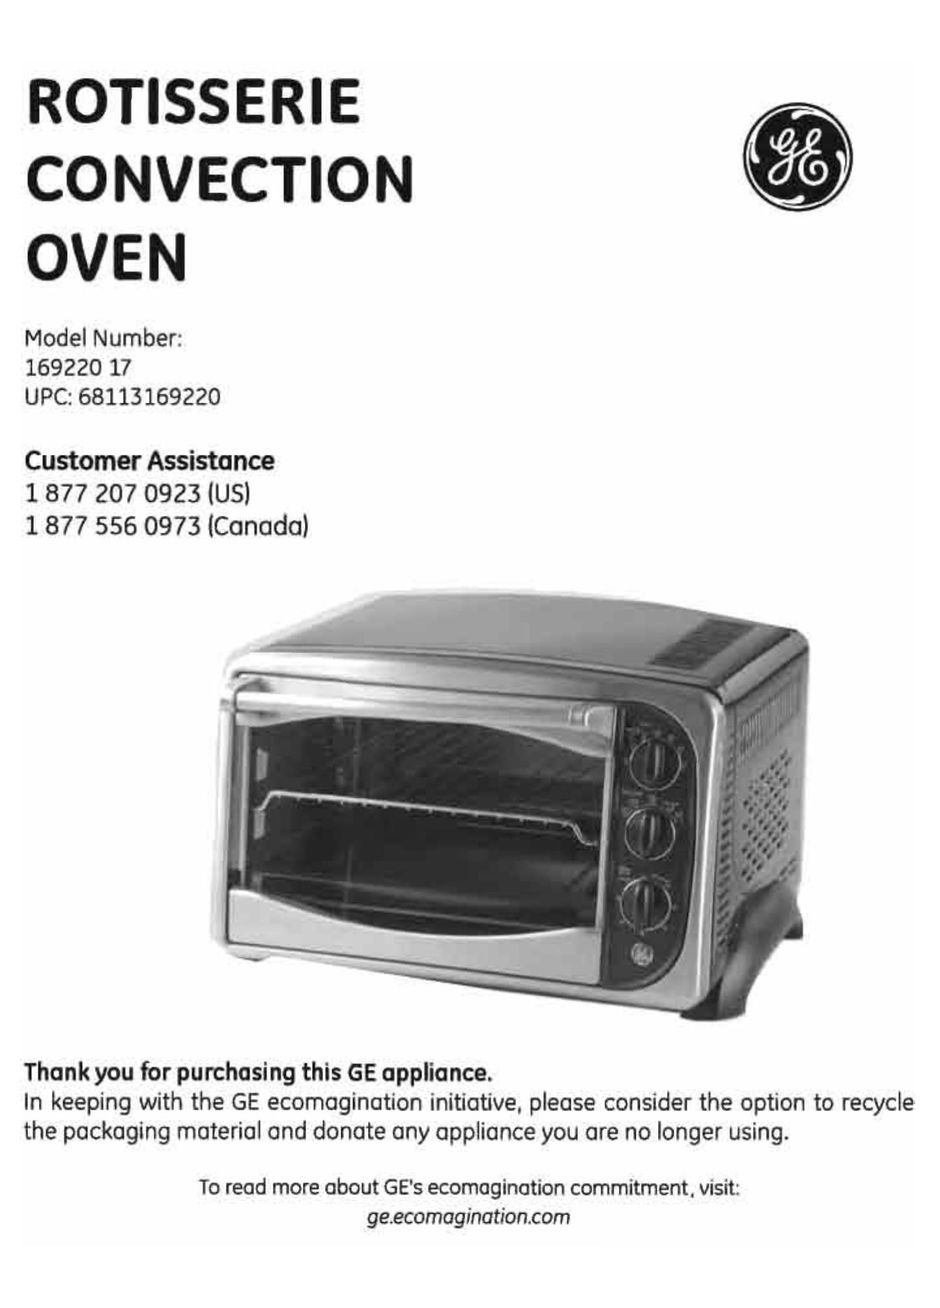 GE 898691 53 Convection Oven User Manual